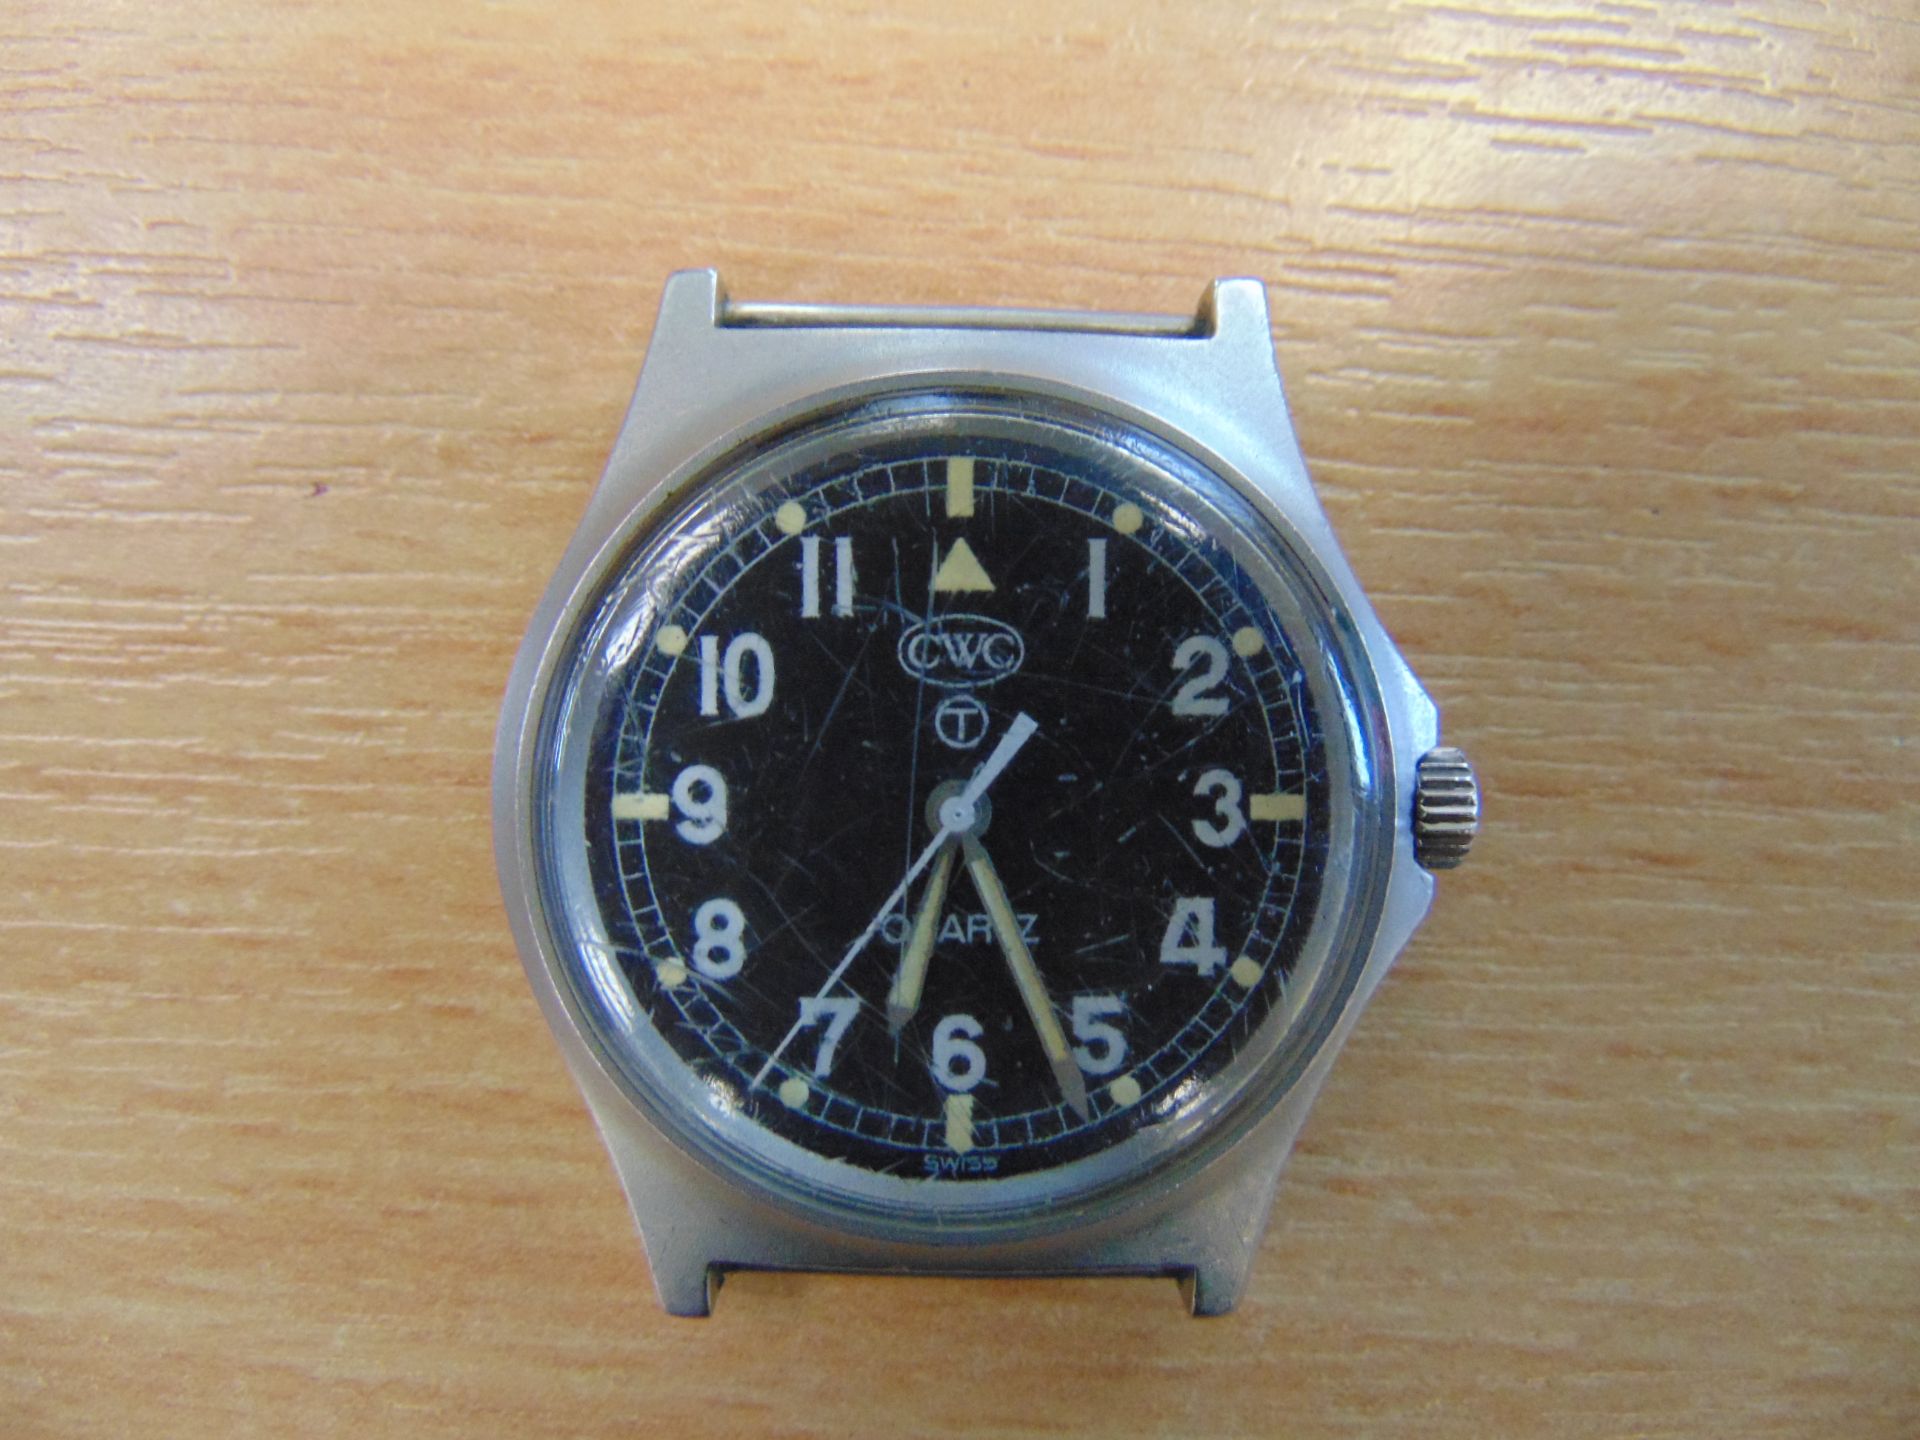 V.Rare CWC W10 Fat Boy Service Watch British Army Issue Nato Marks, Date 1984 - Image 3 of 6